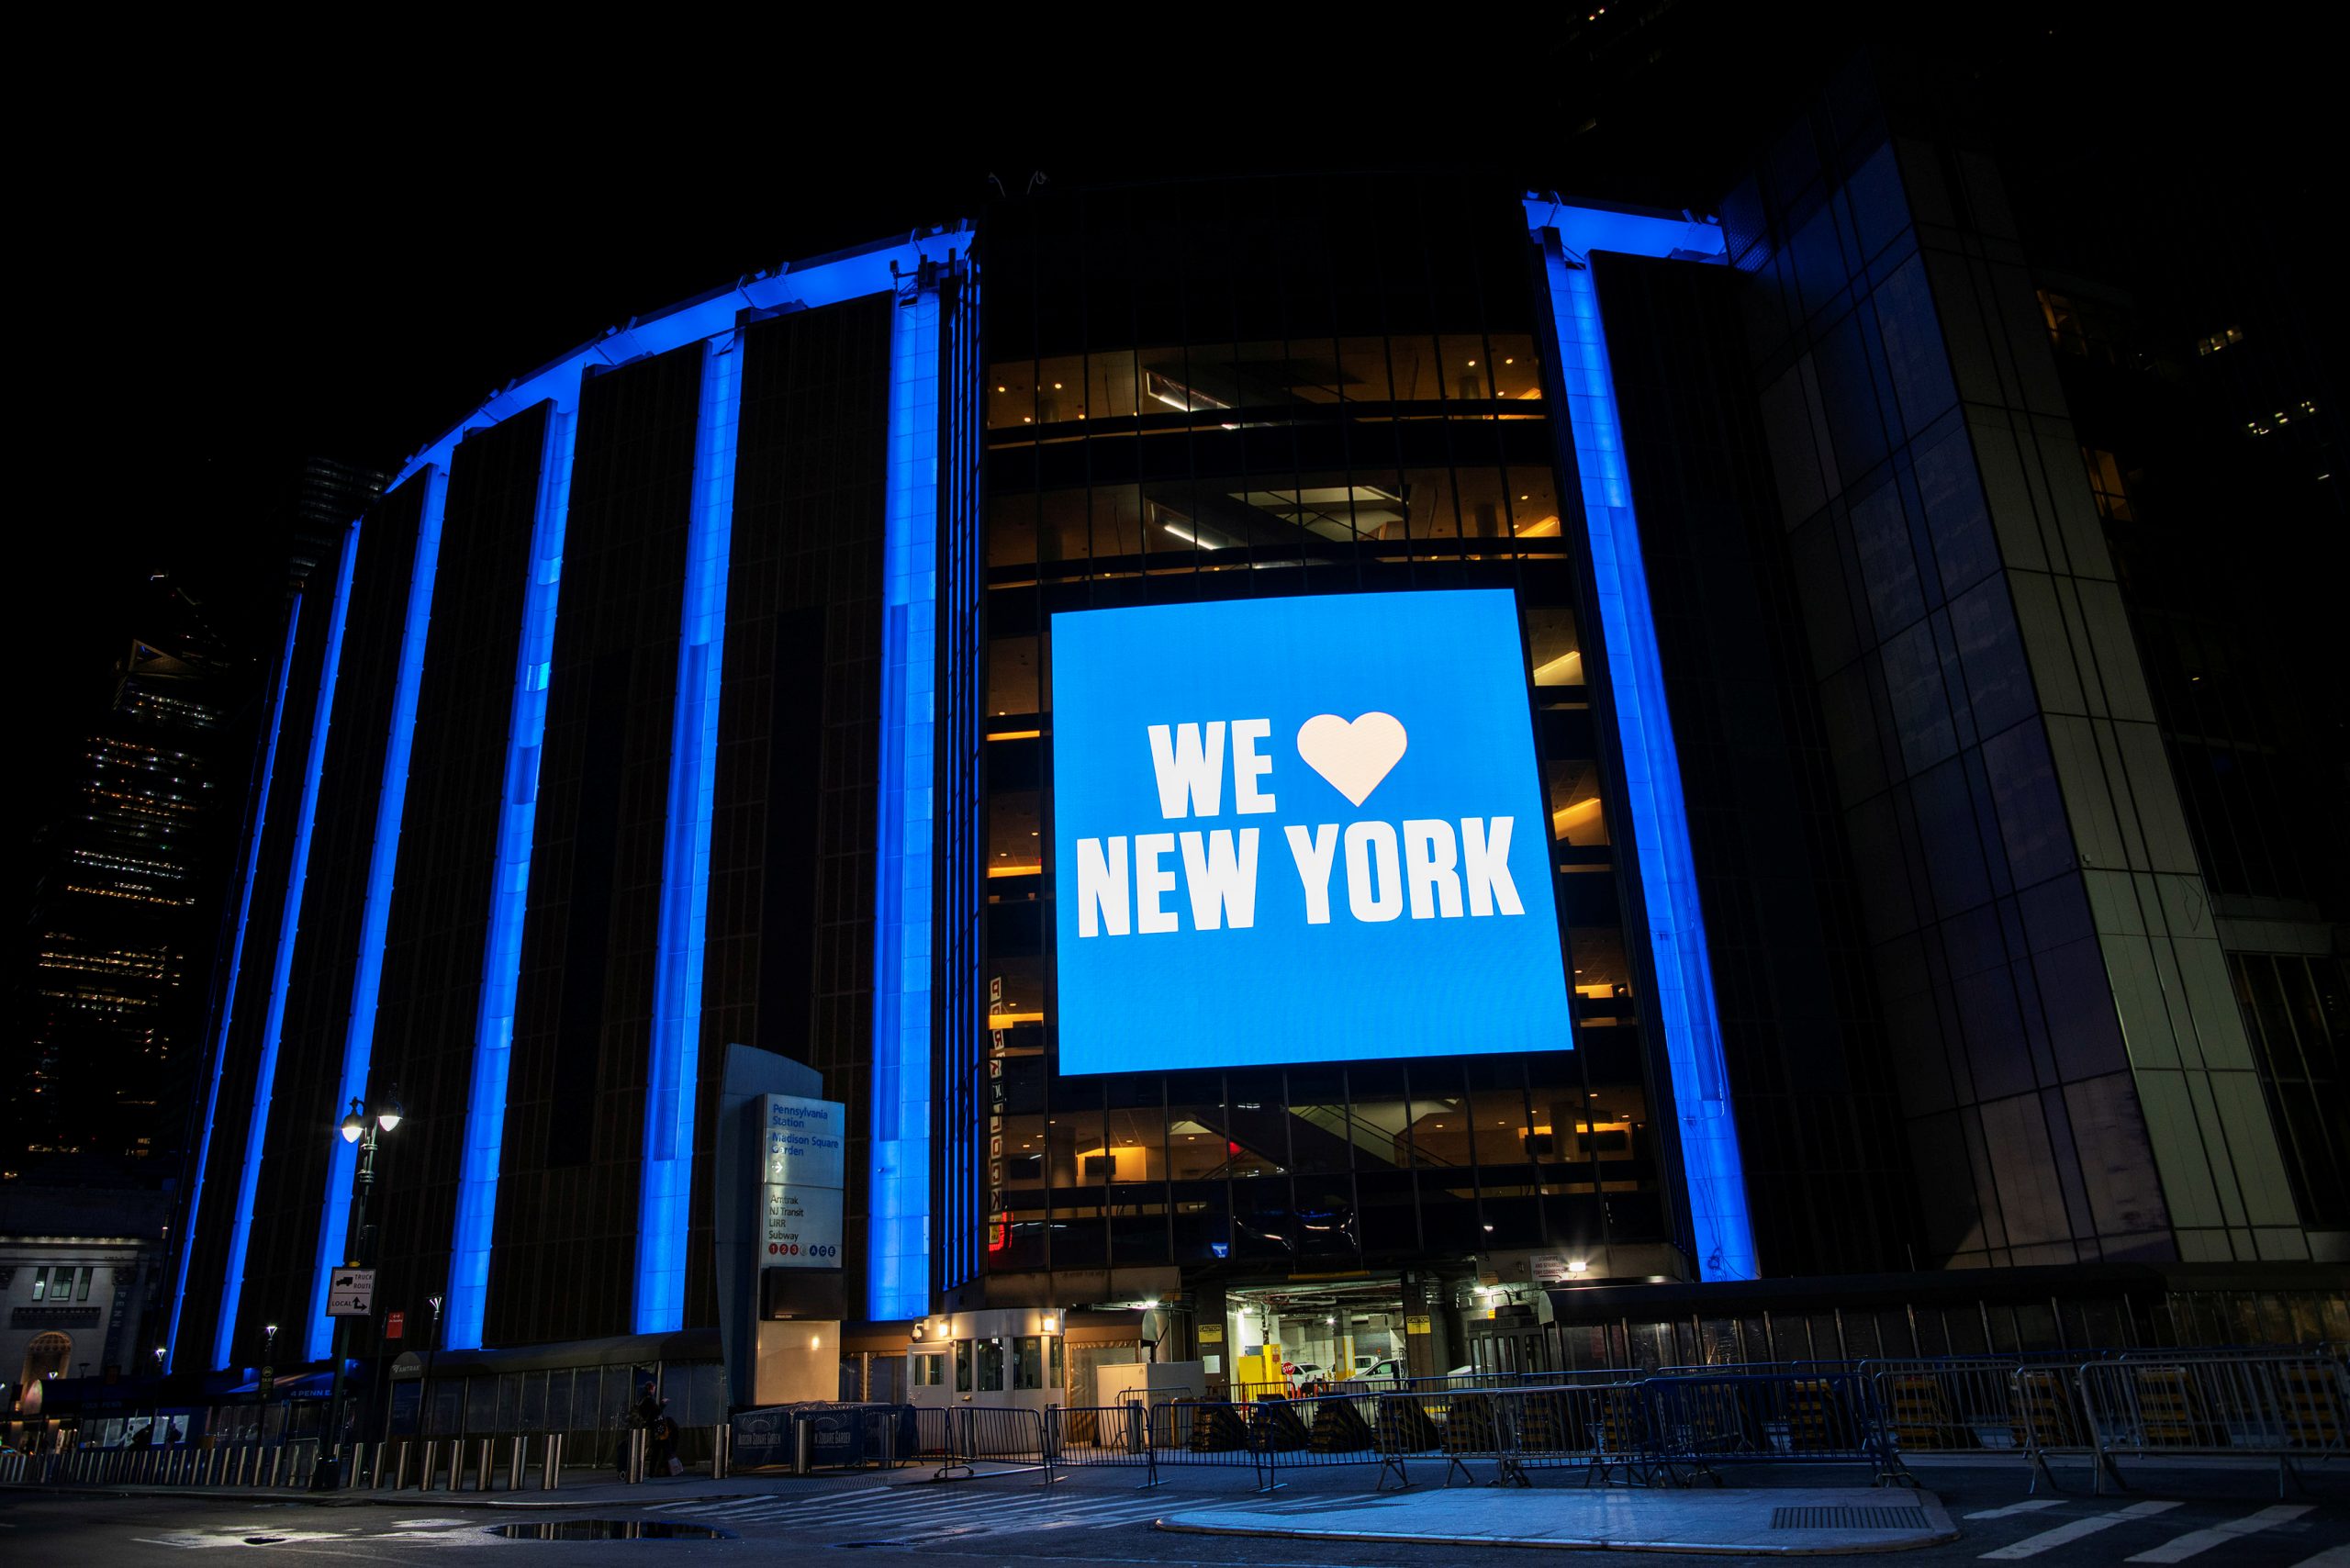 Madison Square Garden Entertainment considers spinoff of New York